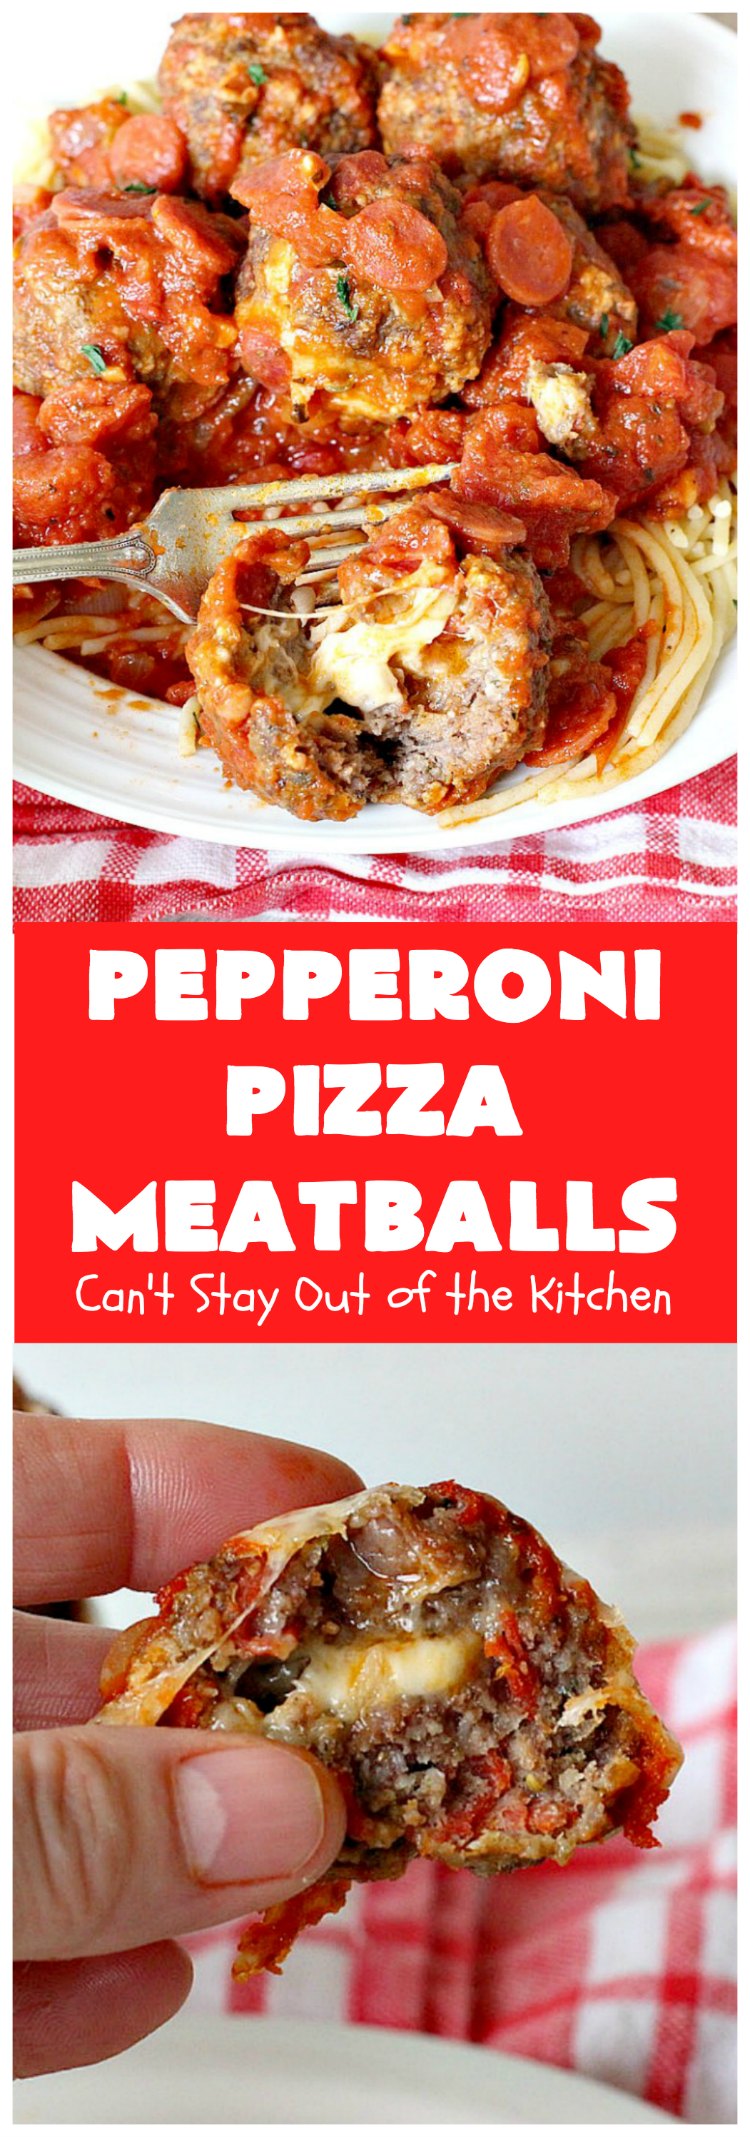 Pepperoni Pizza Meatballs | Can't Stay Out of the Kitchen